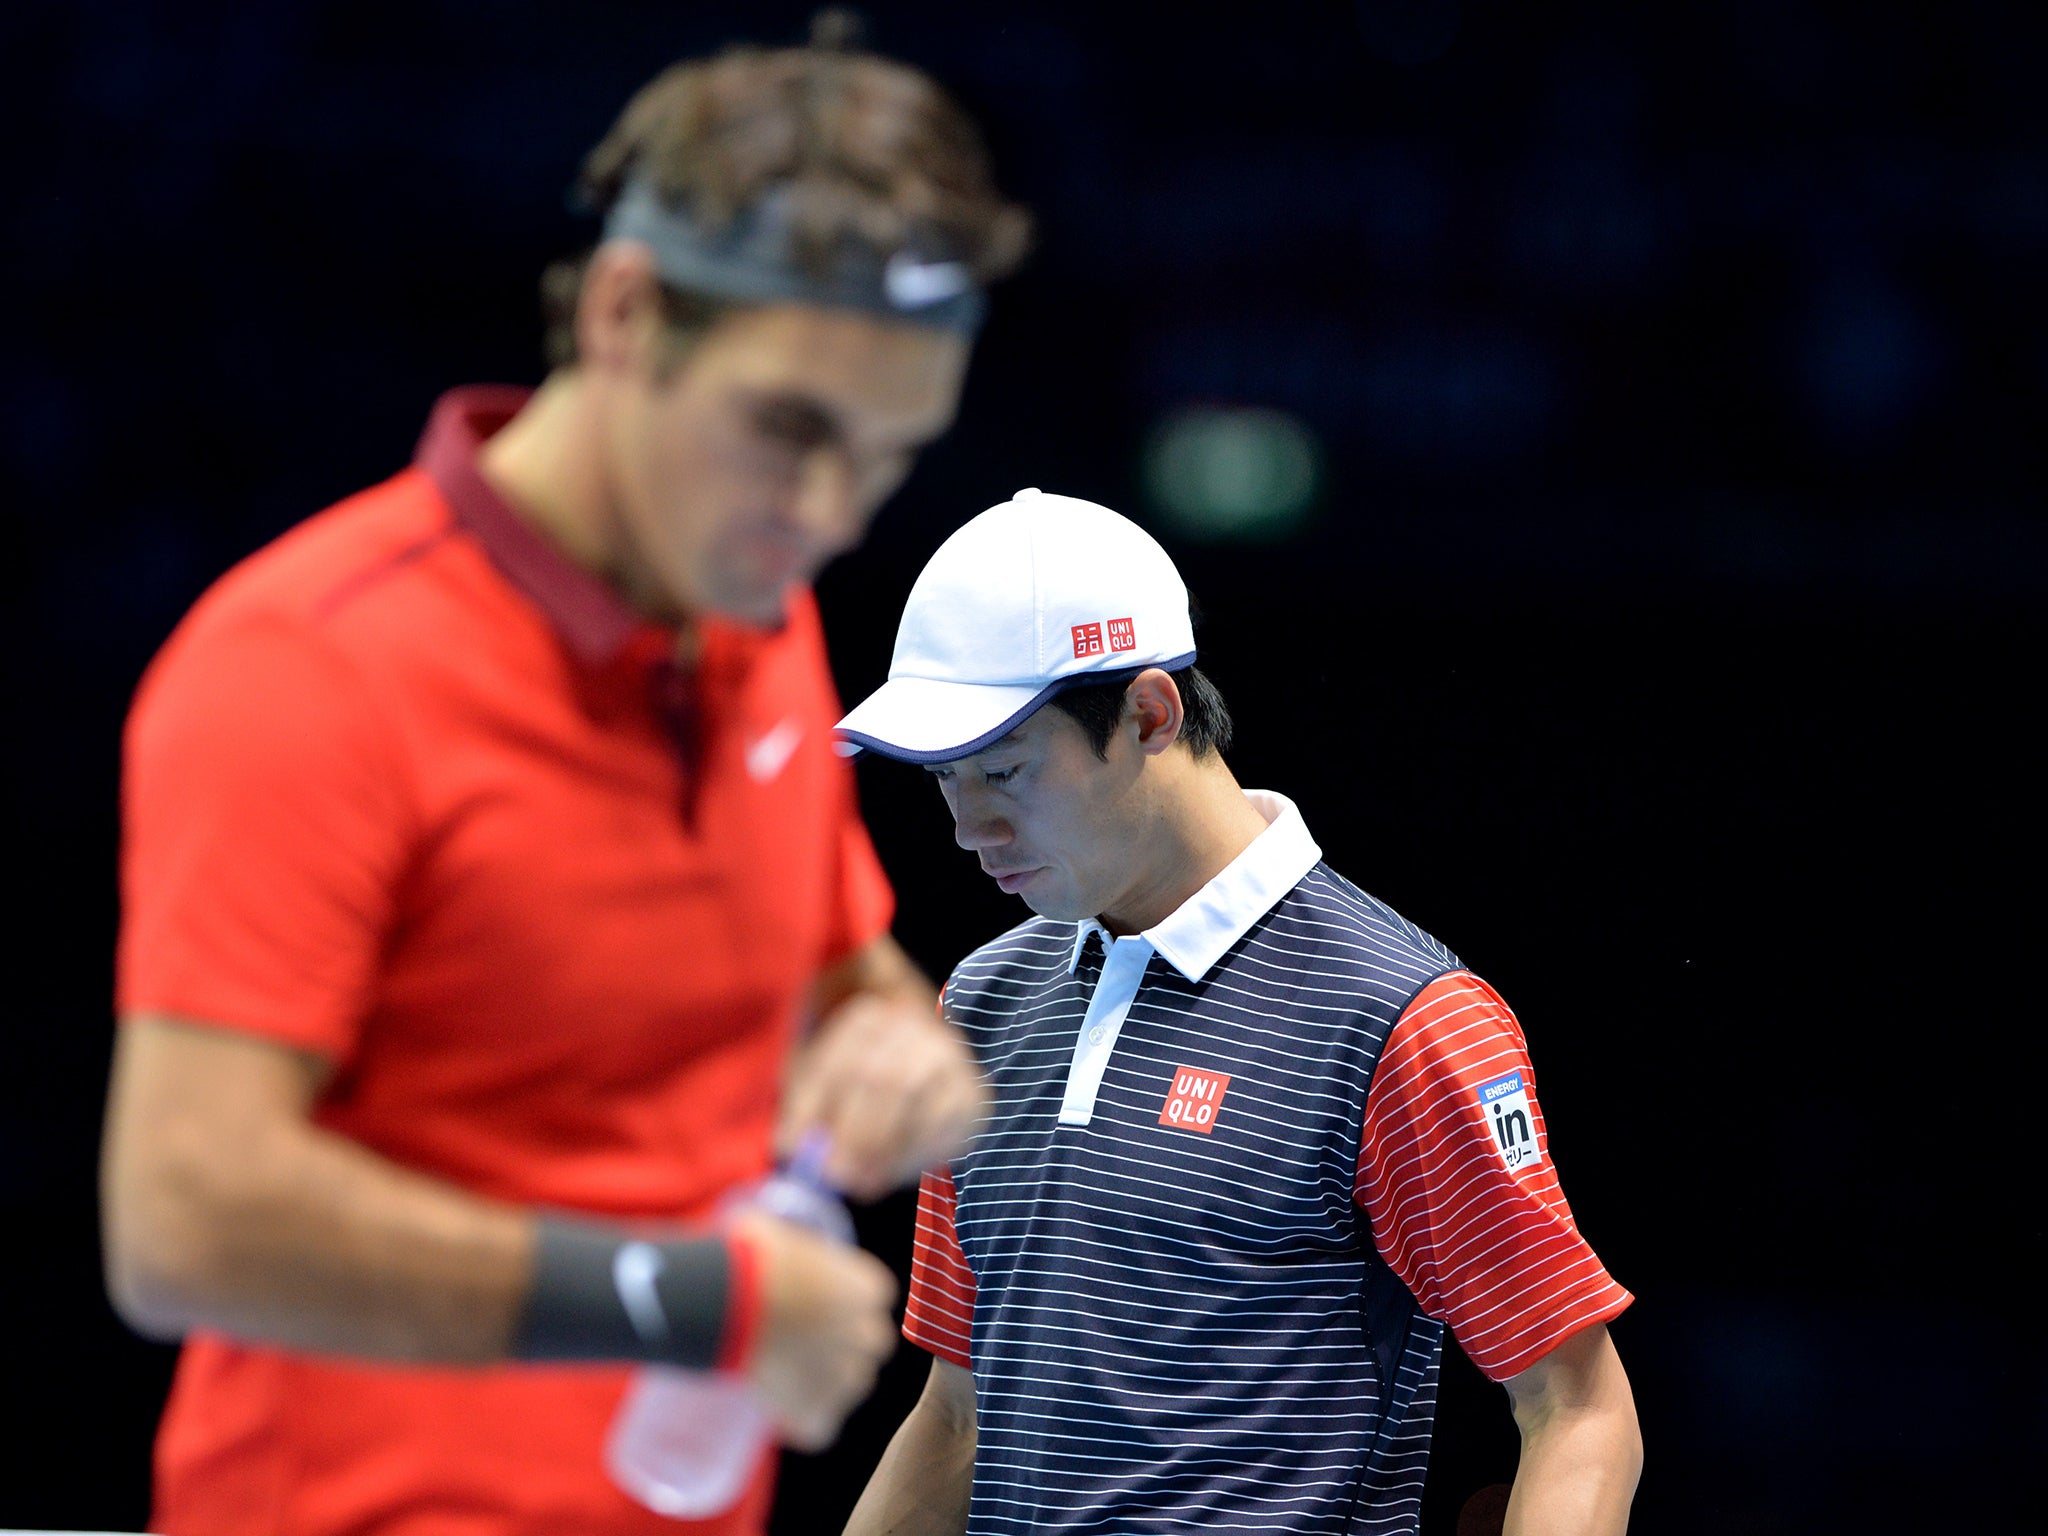 Switzerland's Rodger Federer and Japan's Kei Nishikori during their match at the O2